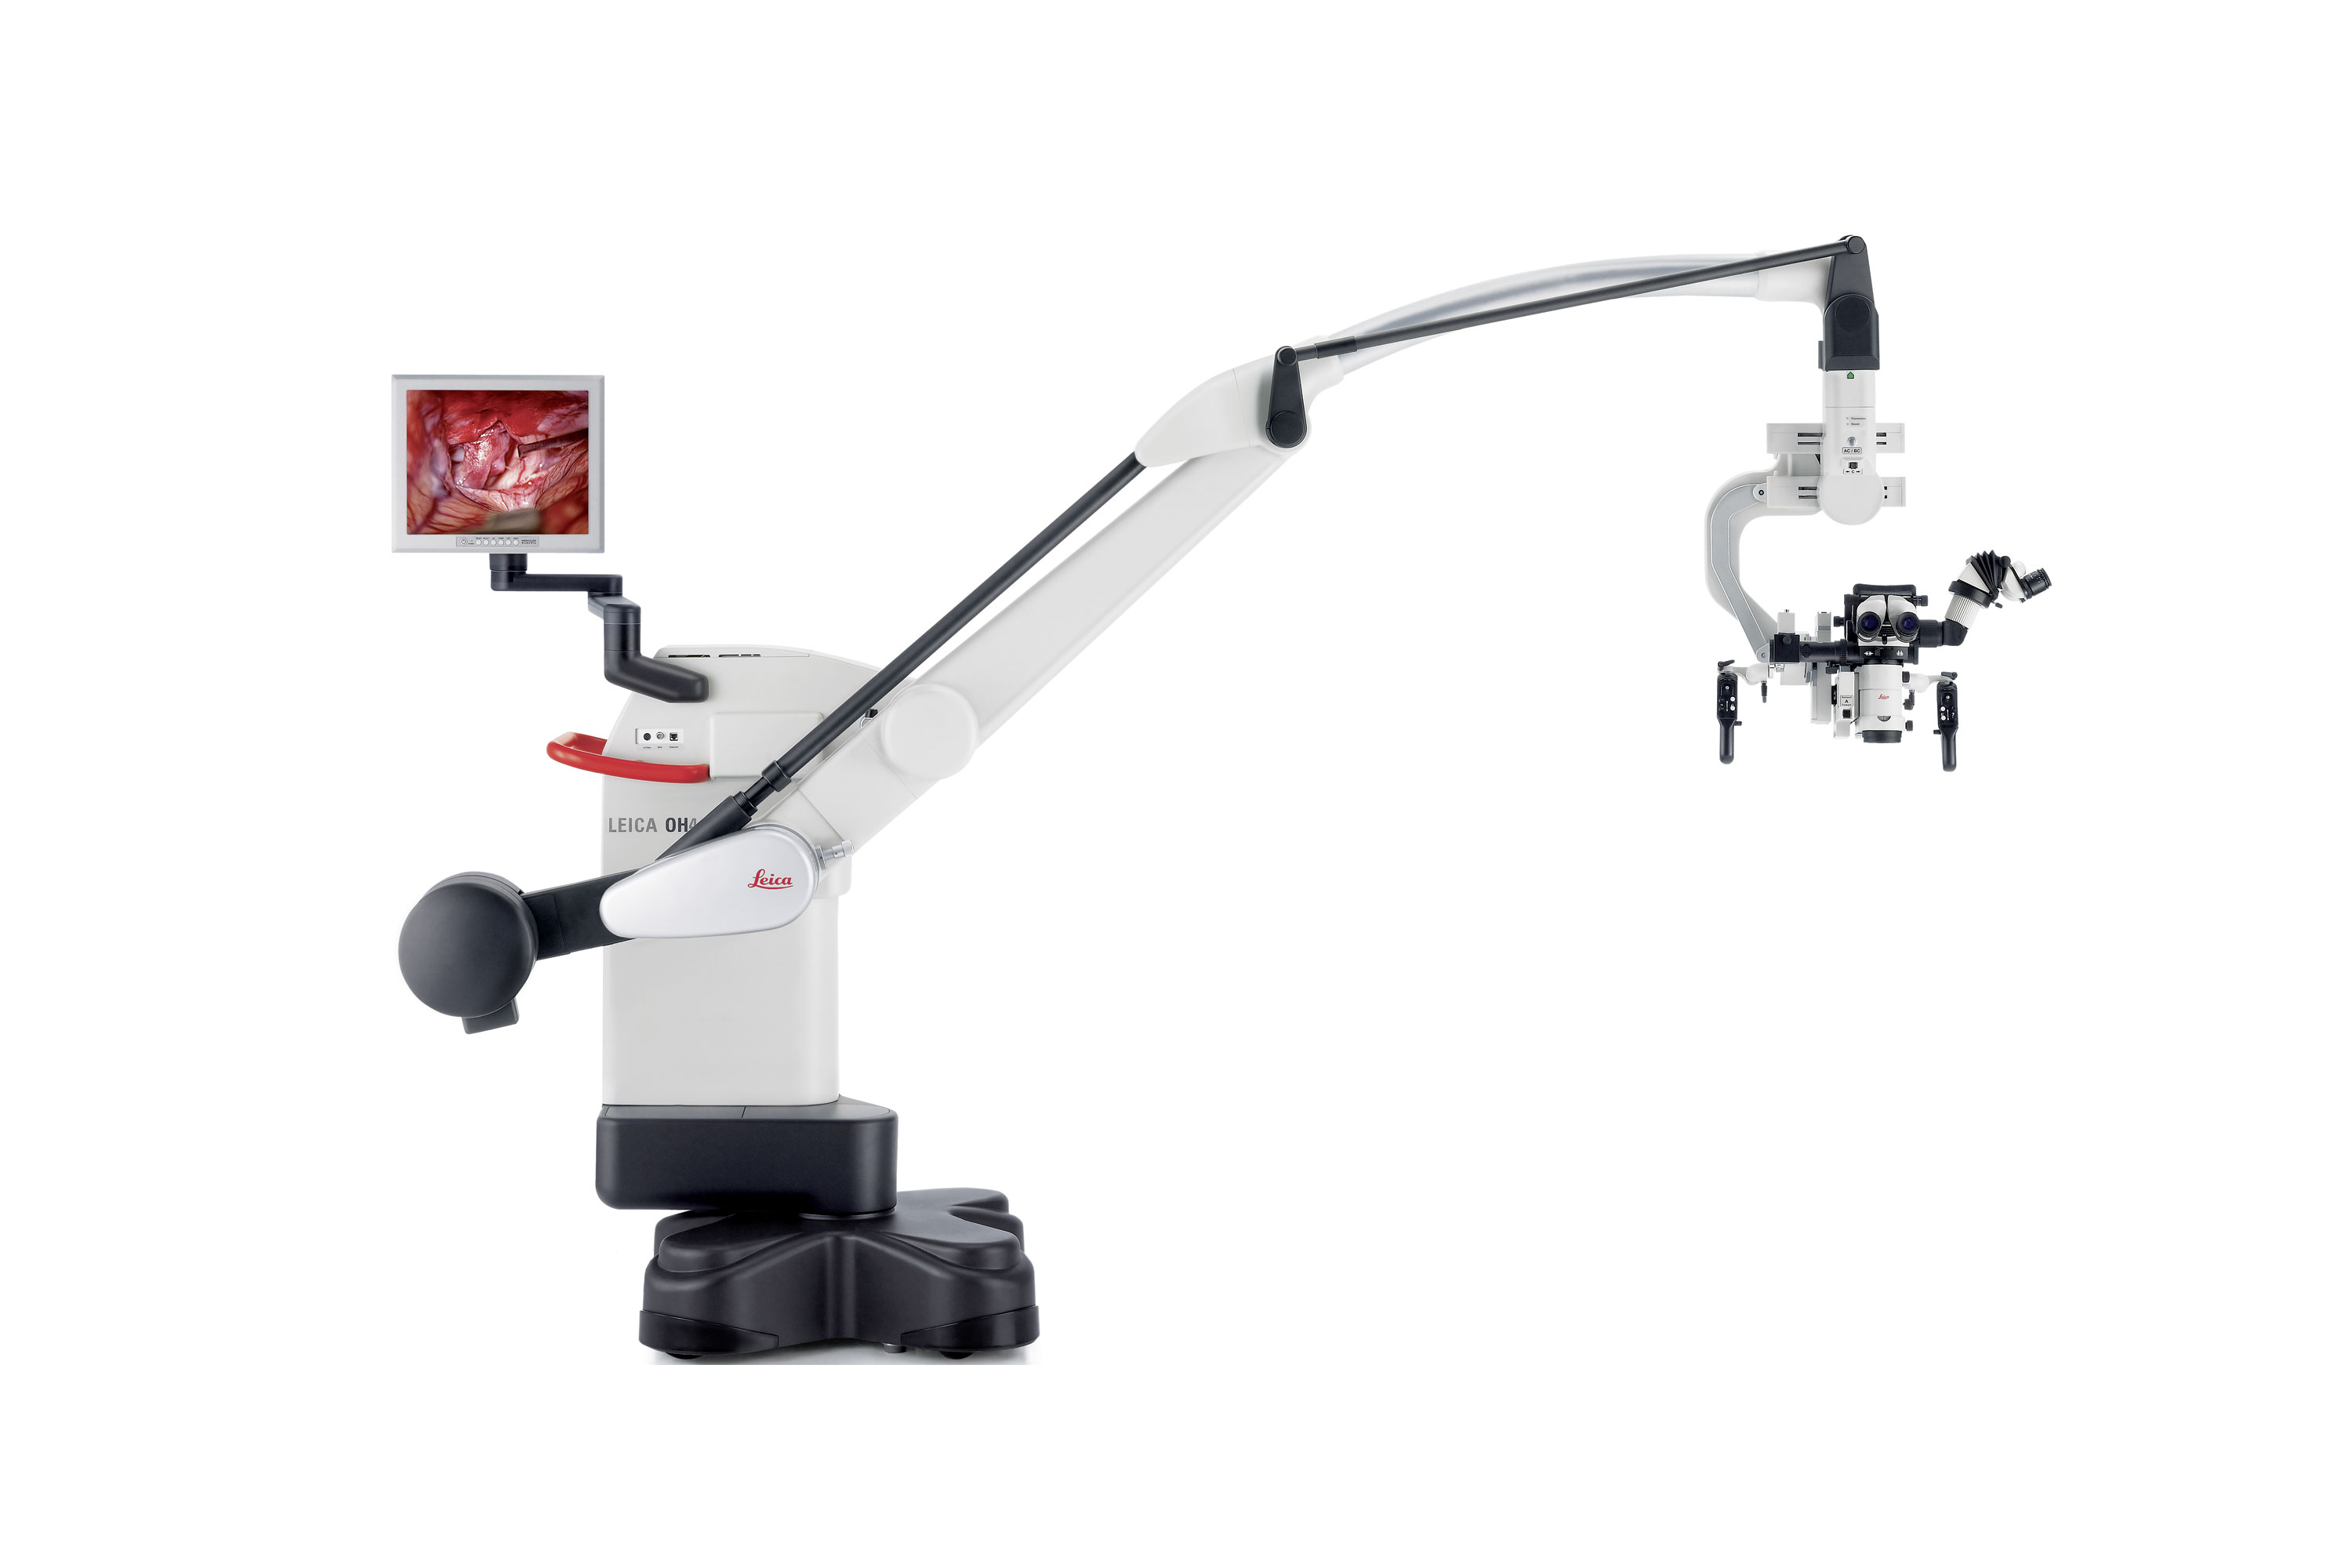 The Leica M25 OH4 surgical microscope solution for precision neurosurgery